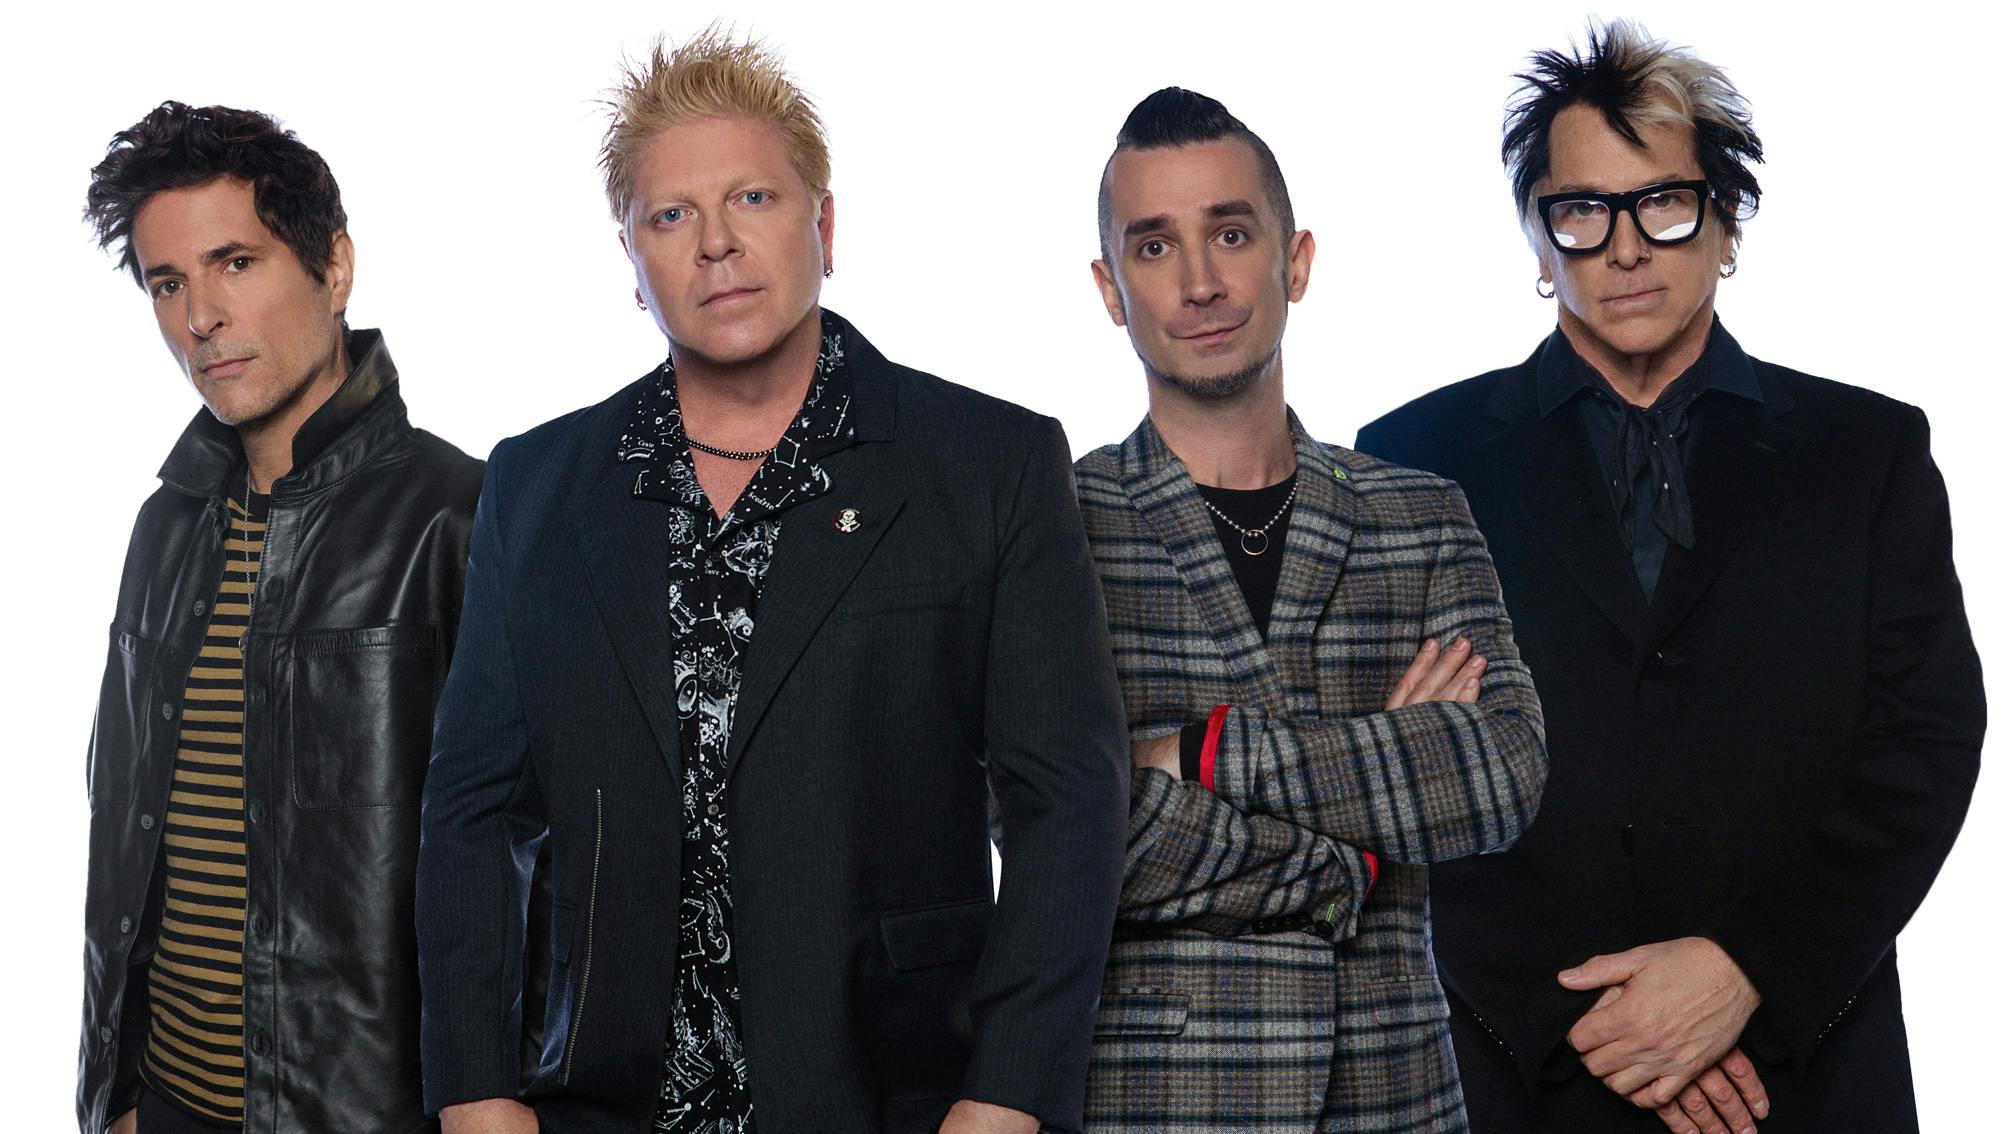 The Offspring announce UK arena tour with The Hives